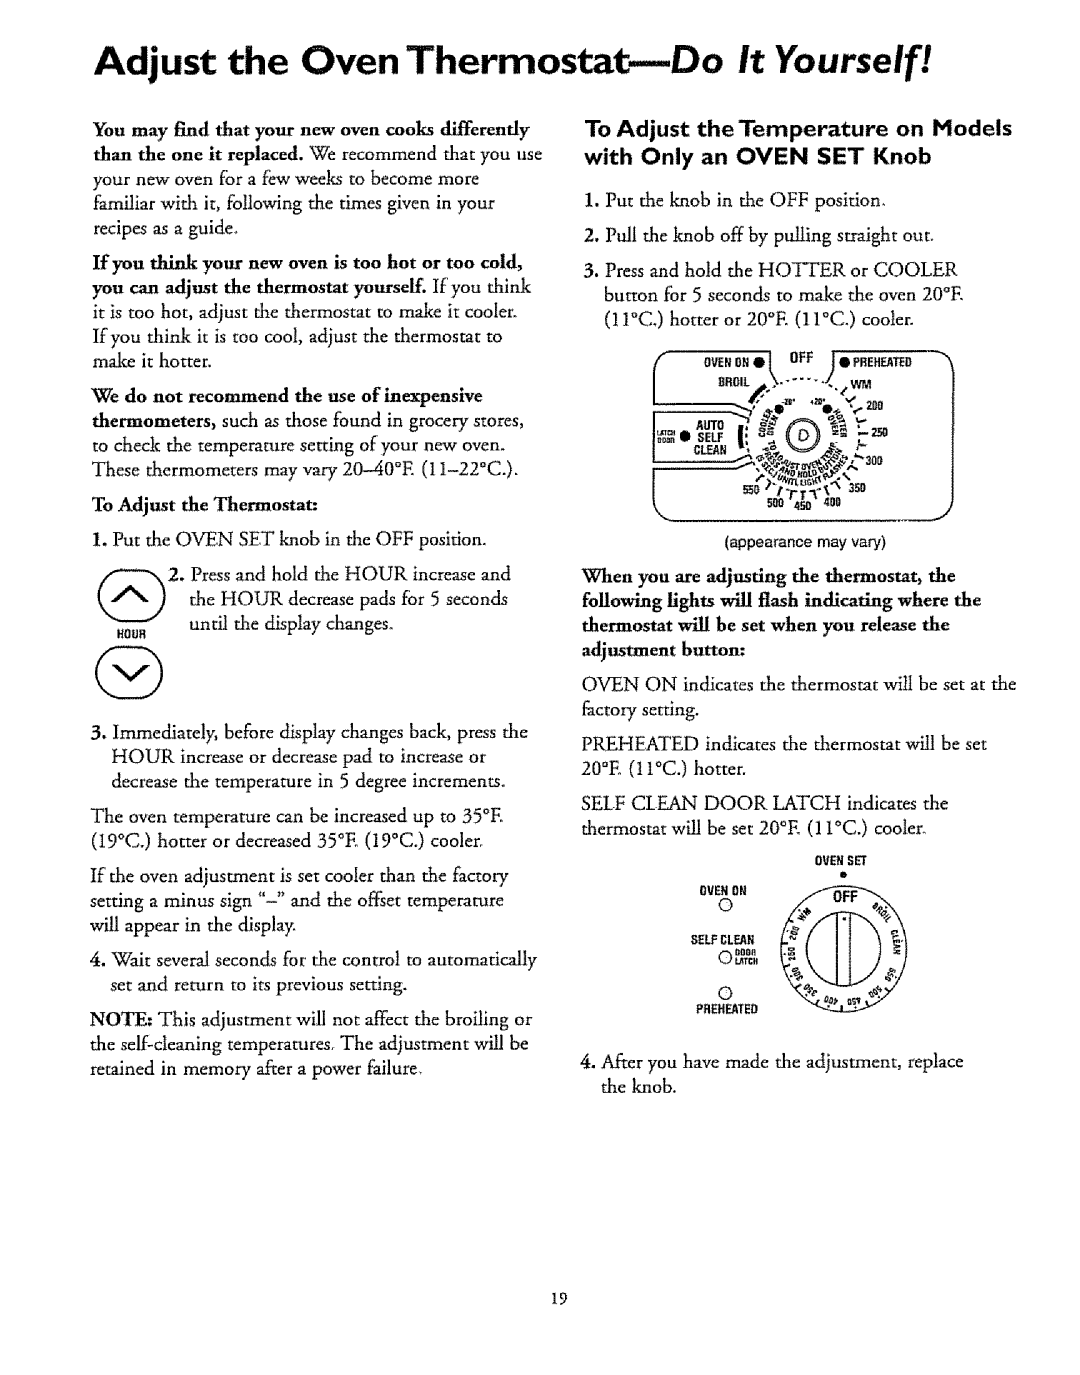 Sears 73271 Adjust the Oven Thermostat---Do it Yourselfi, To Adjust the Temperature on Models, with Only an OVEN SET Knob 